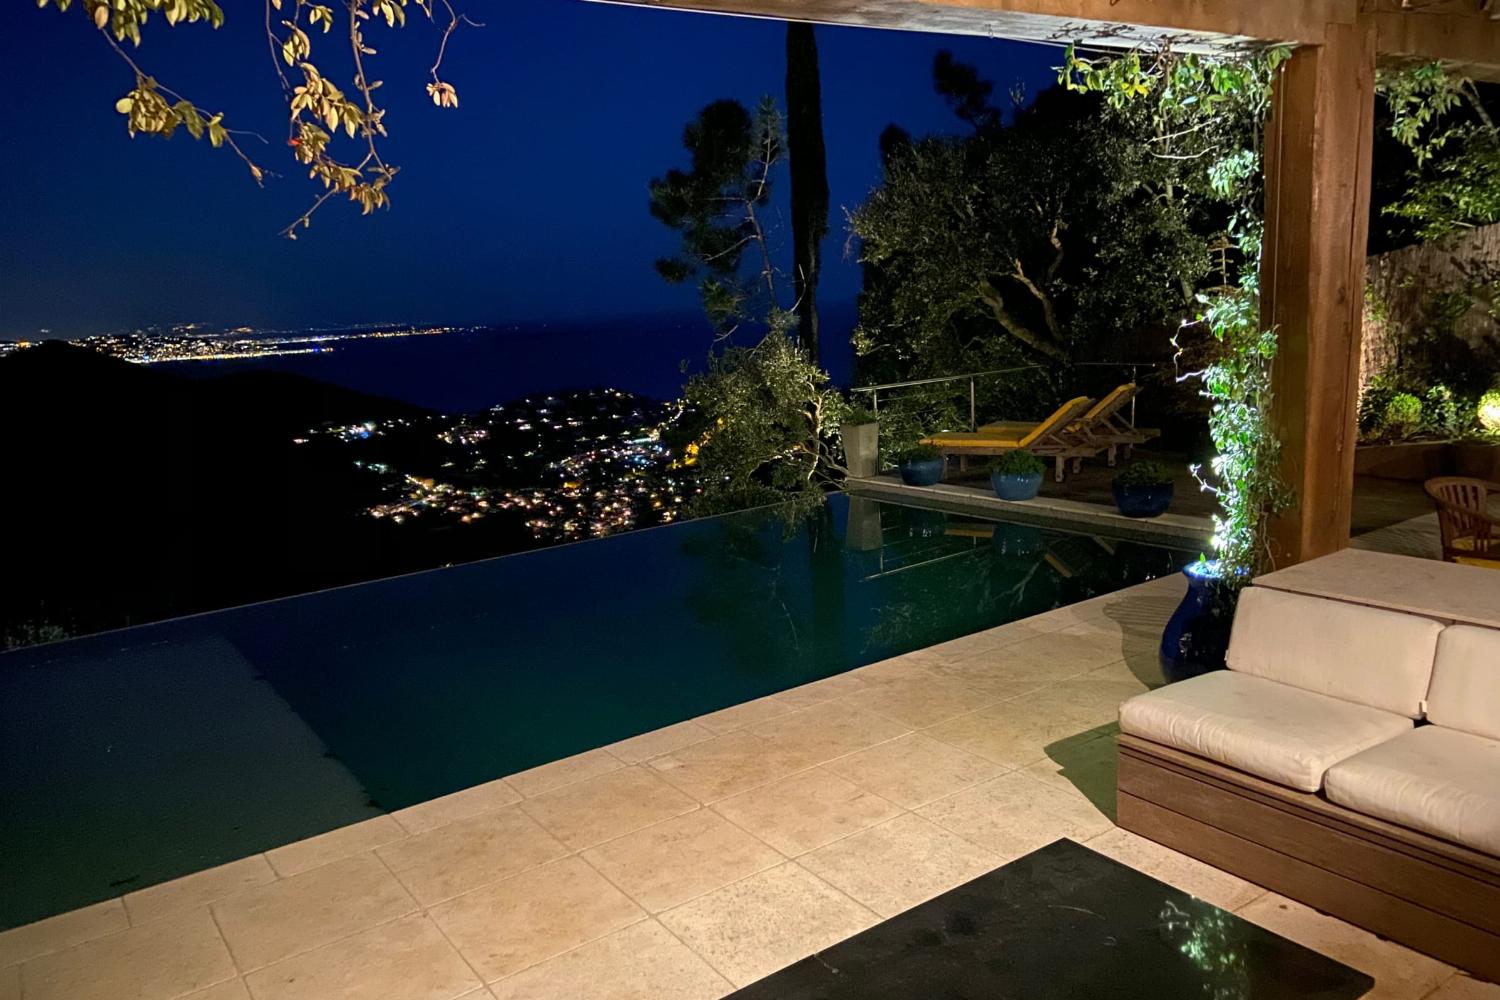 Private pool at night